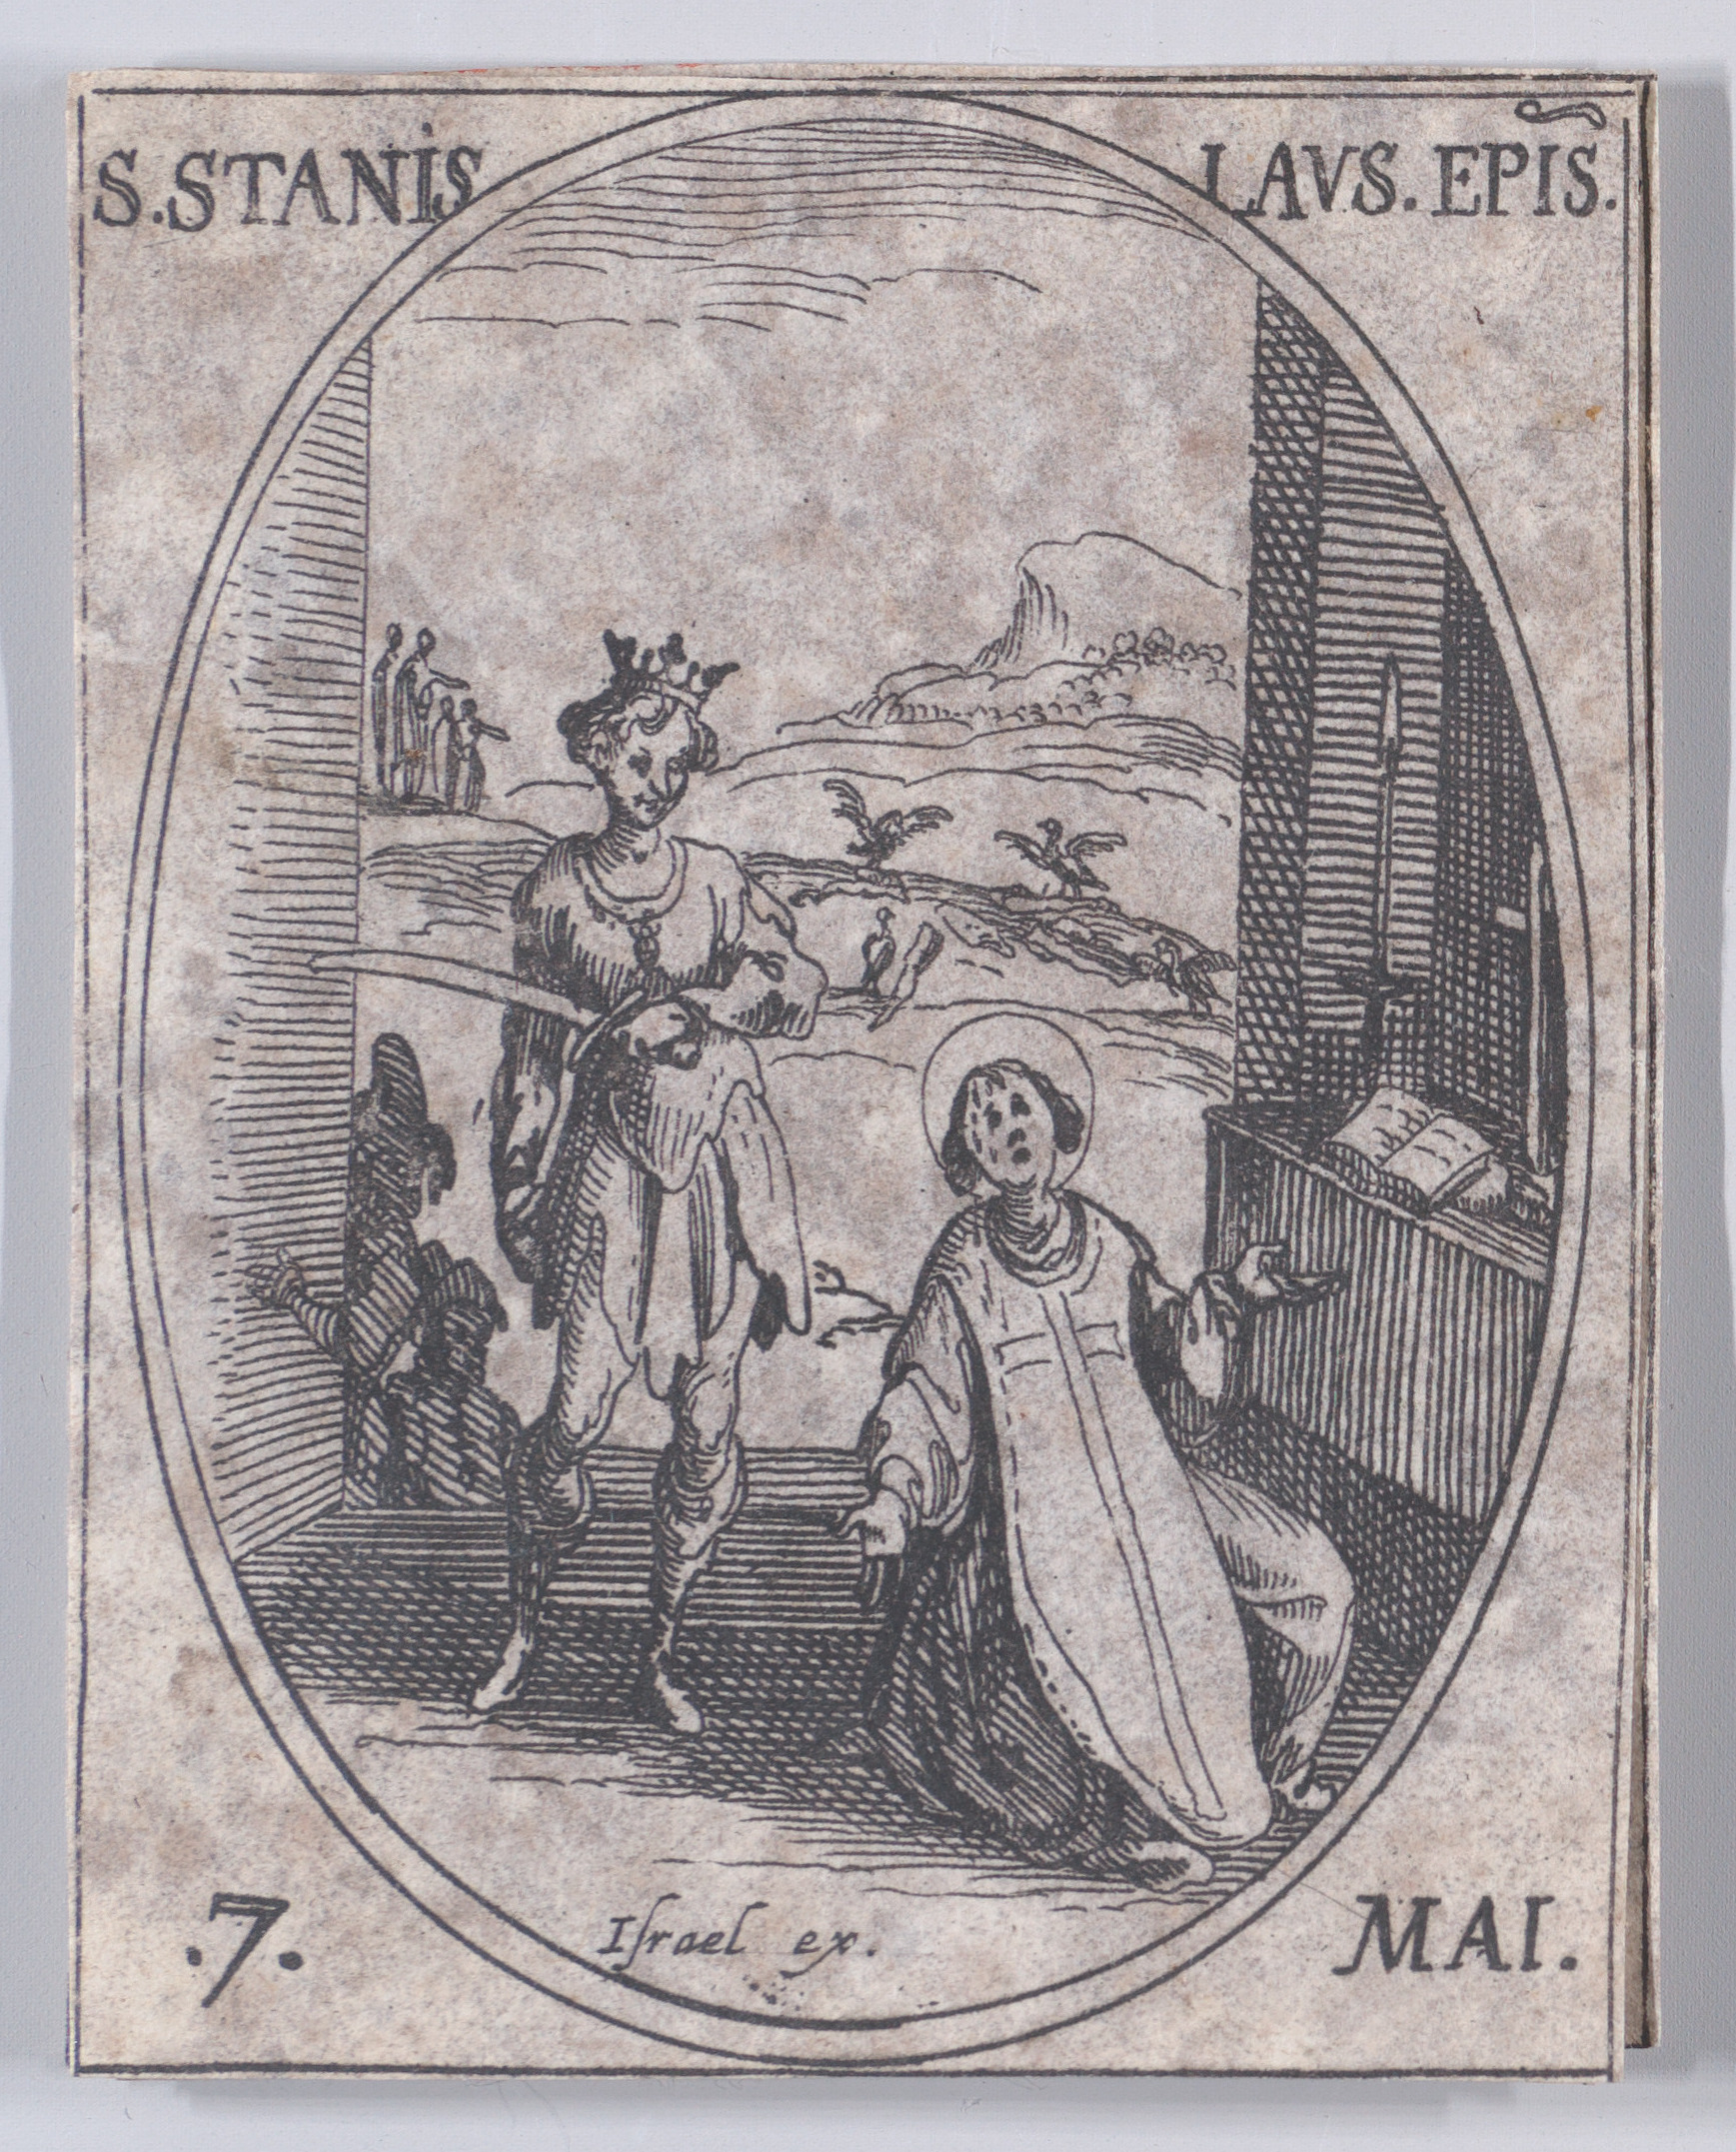 S. Stanislas, évêque (St. Stanislaus, Bishop), May 7th, from Les Images De Tous Les Saincts et Saintes de L'Année (Images of All of the Saints and Religious Events of the Year), Jacques Callot (French, Nancy 1592–1635 Nancy), Etching; second state of two (Lieure)